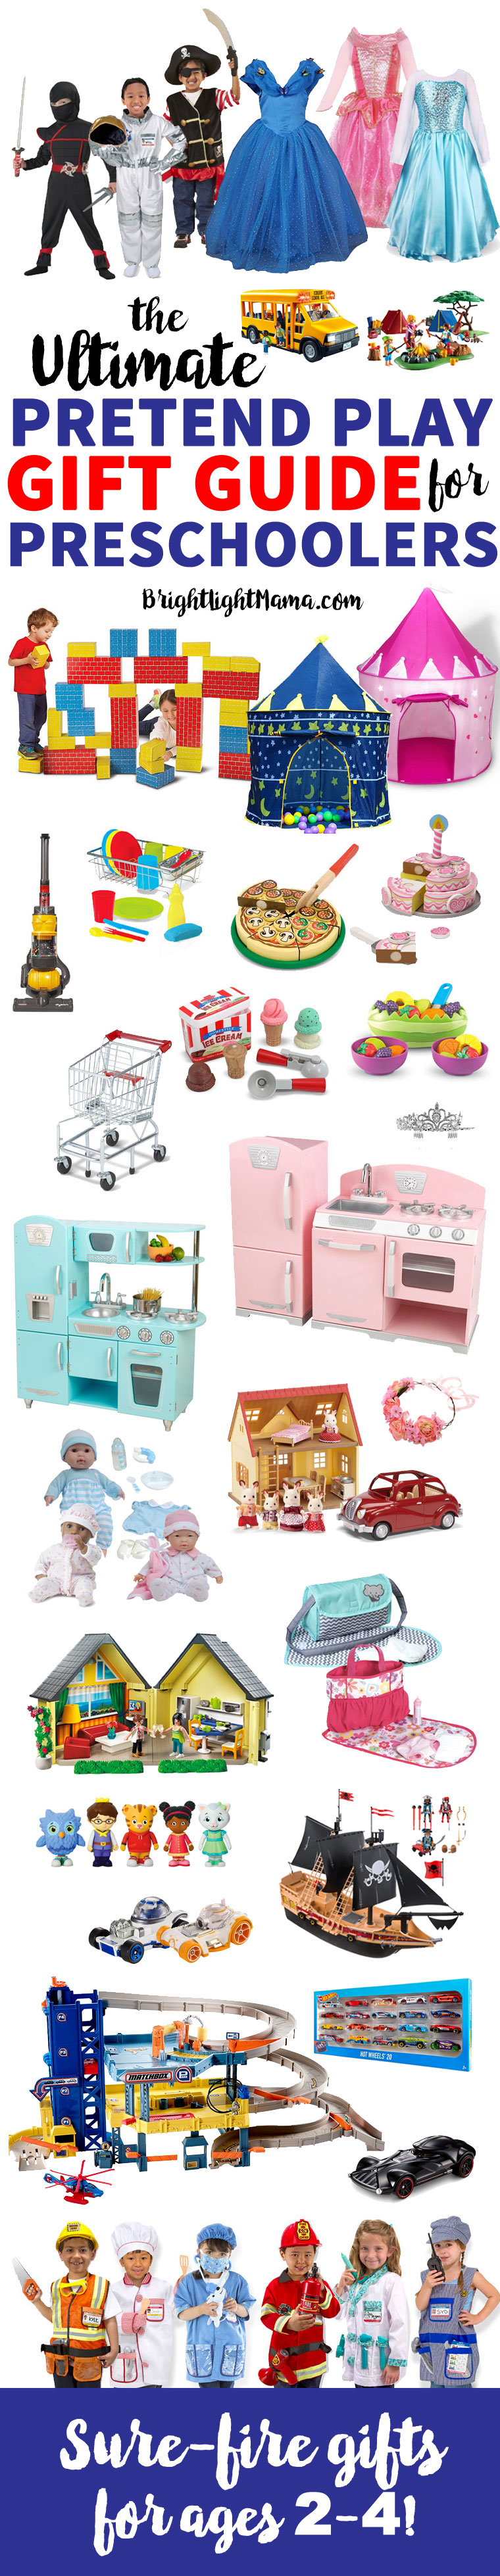 Gifts for little kids - Preschool Christmas or Birthday gift ideas